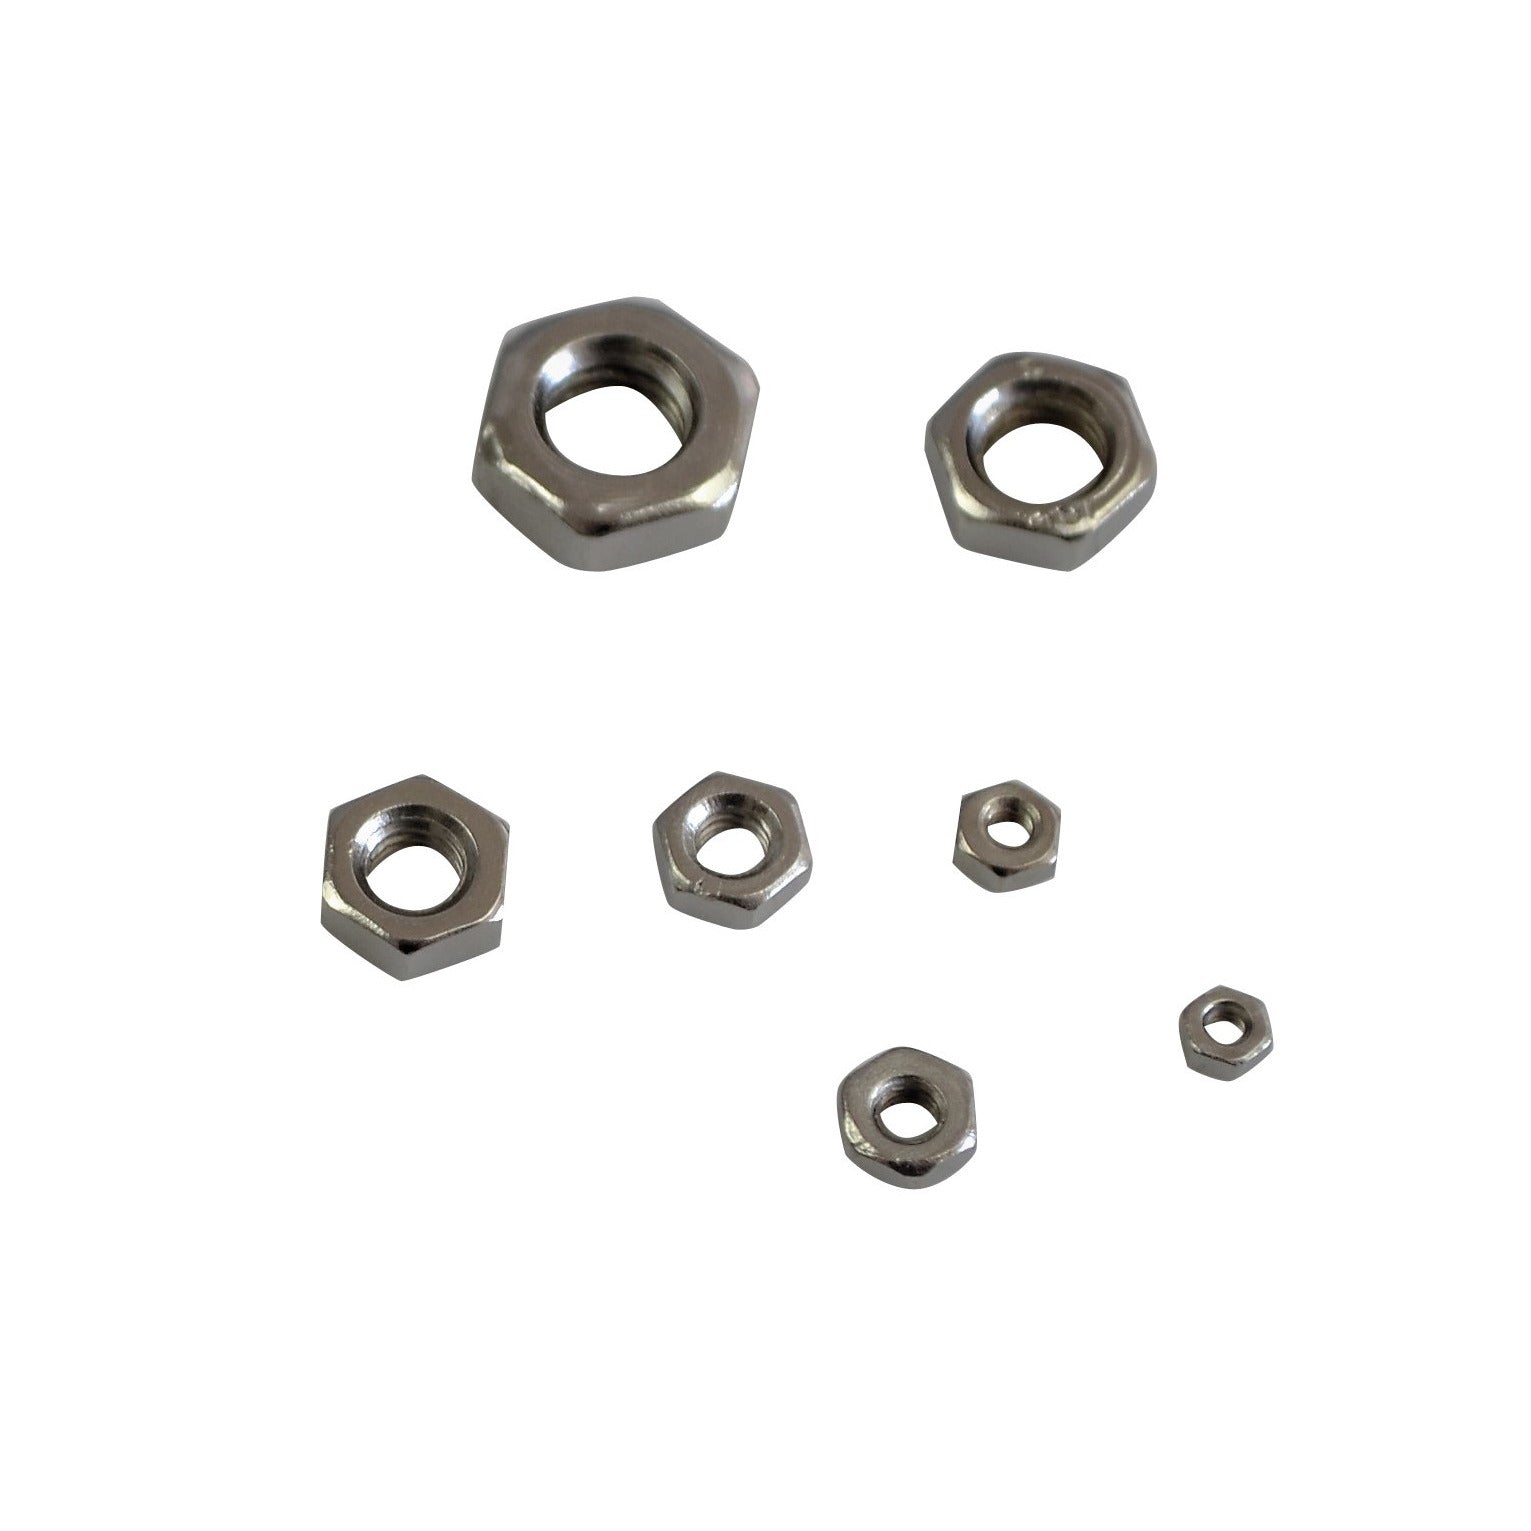 Stainless Steel Hex Nut 350pc Grab Kit Assortment